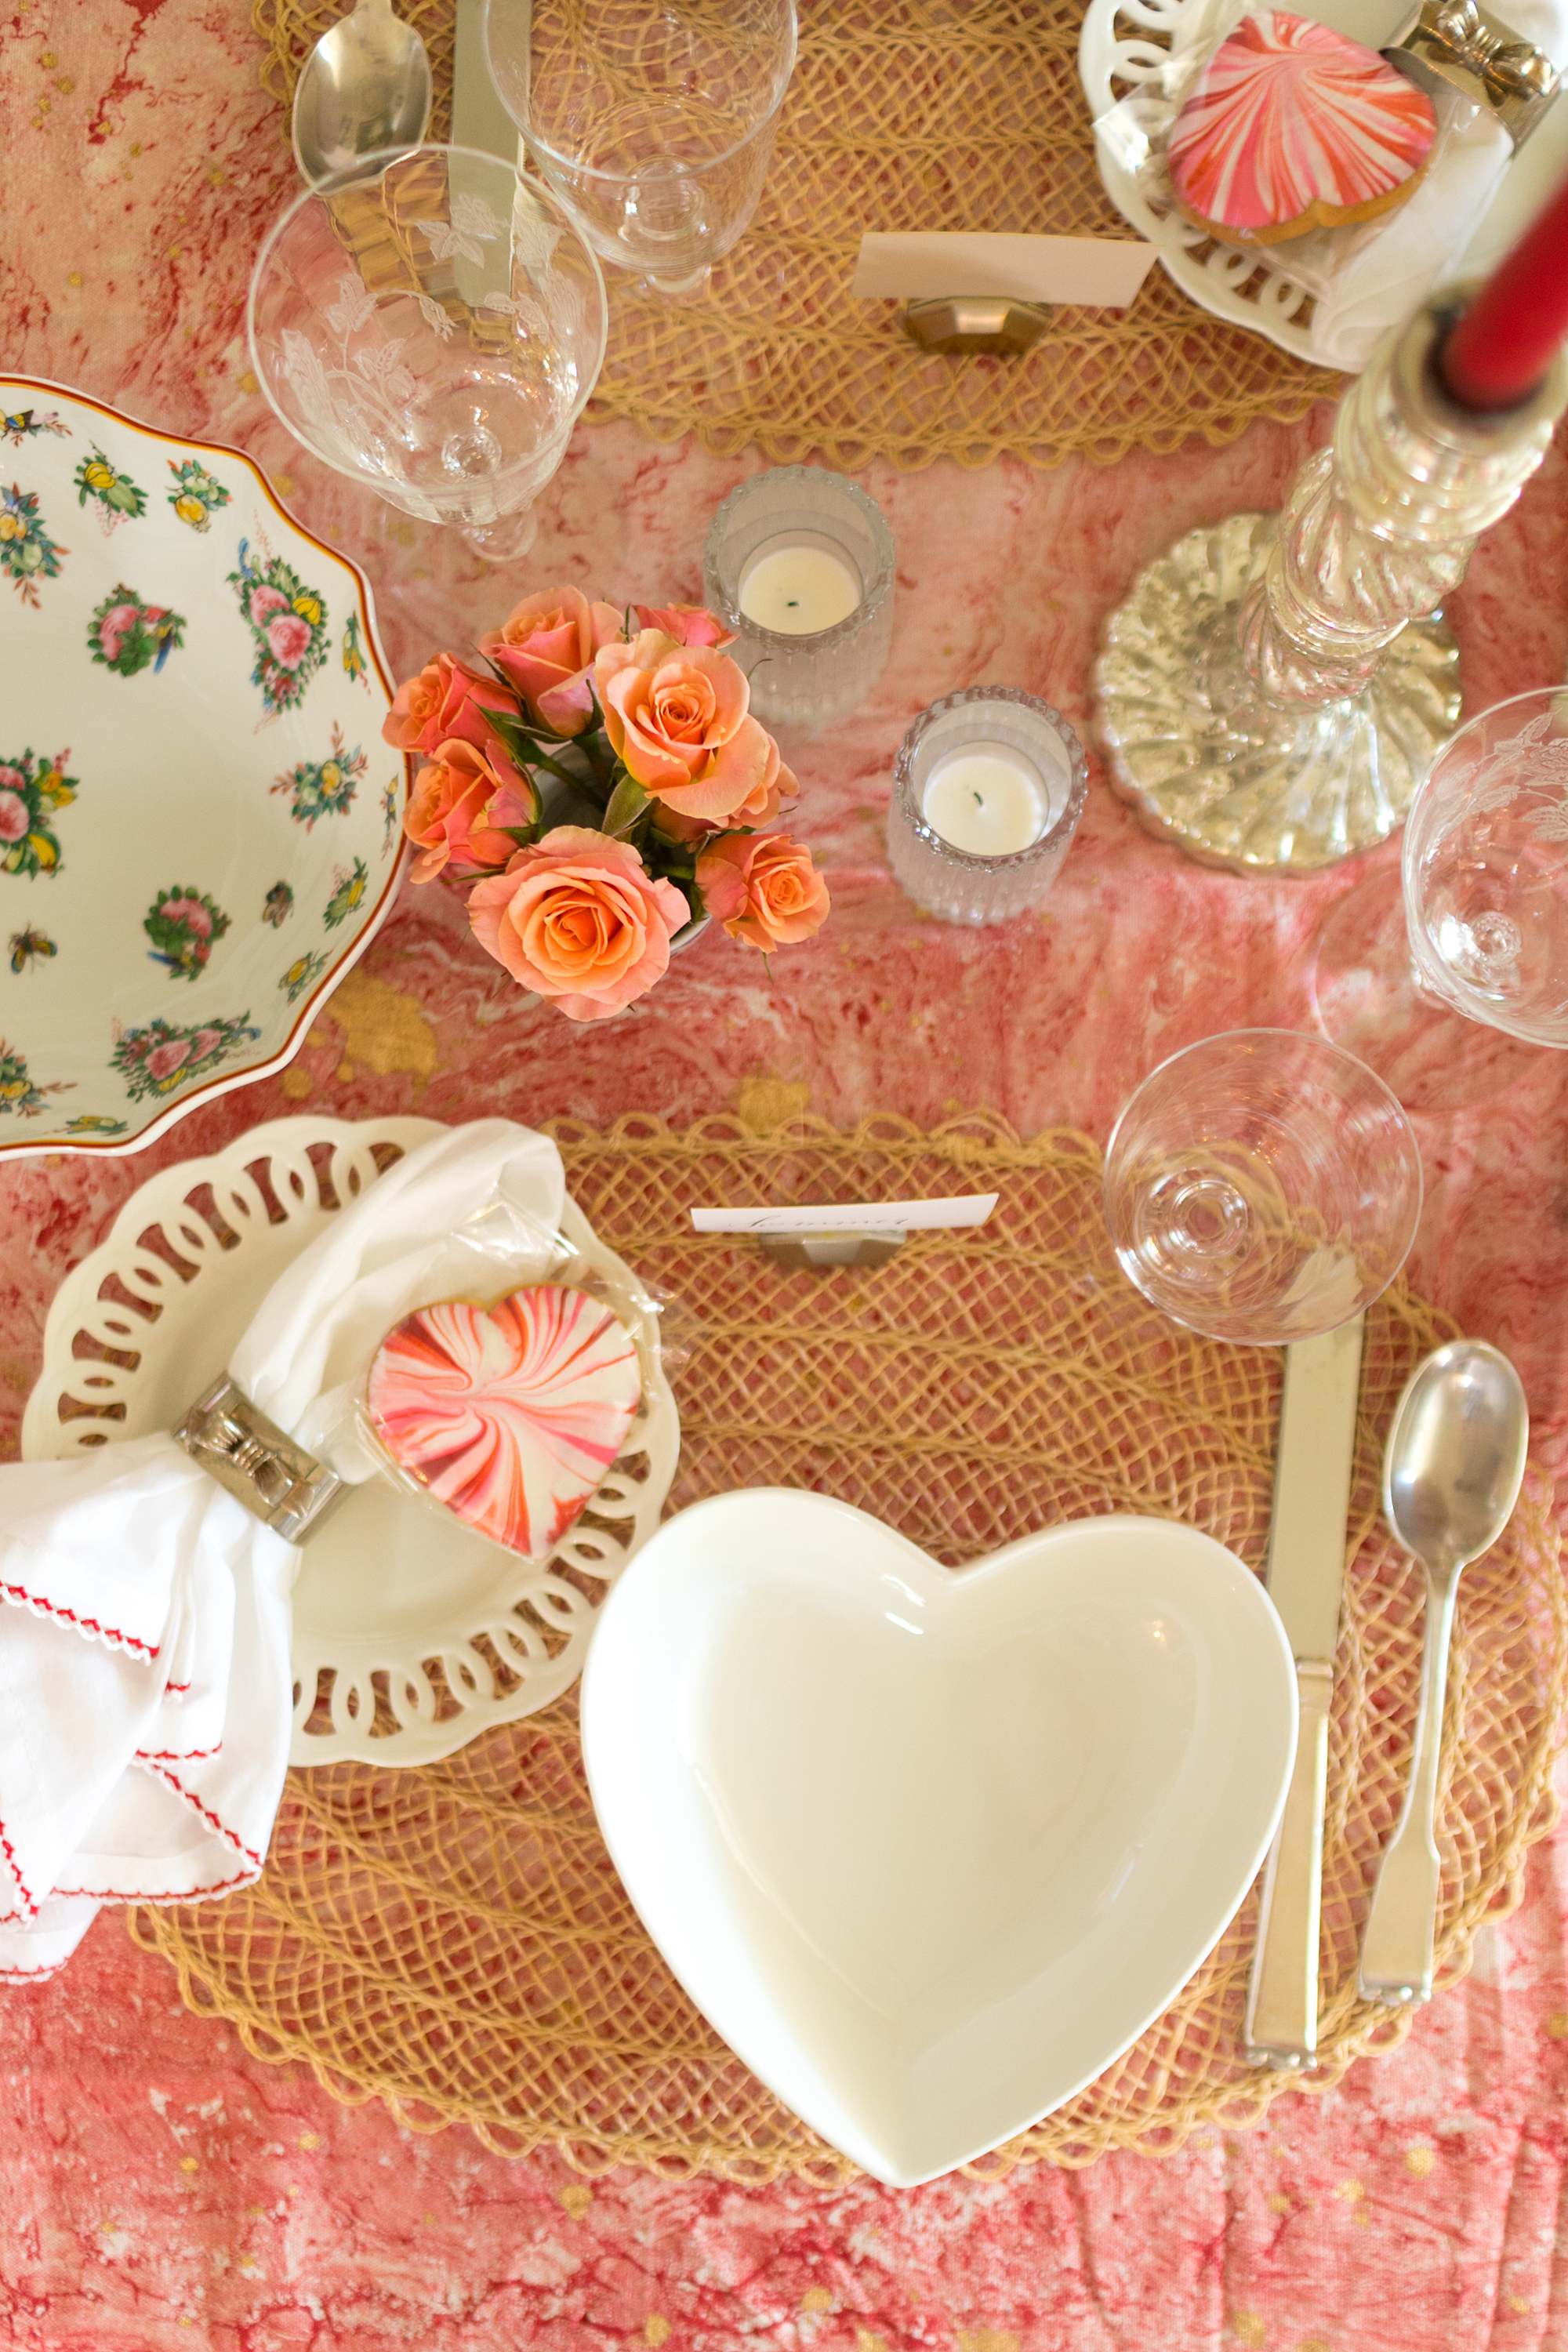 valentines day galentine's day party and gift ideas white heart bowls